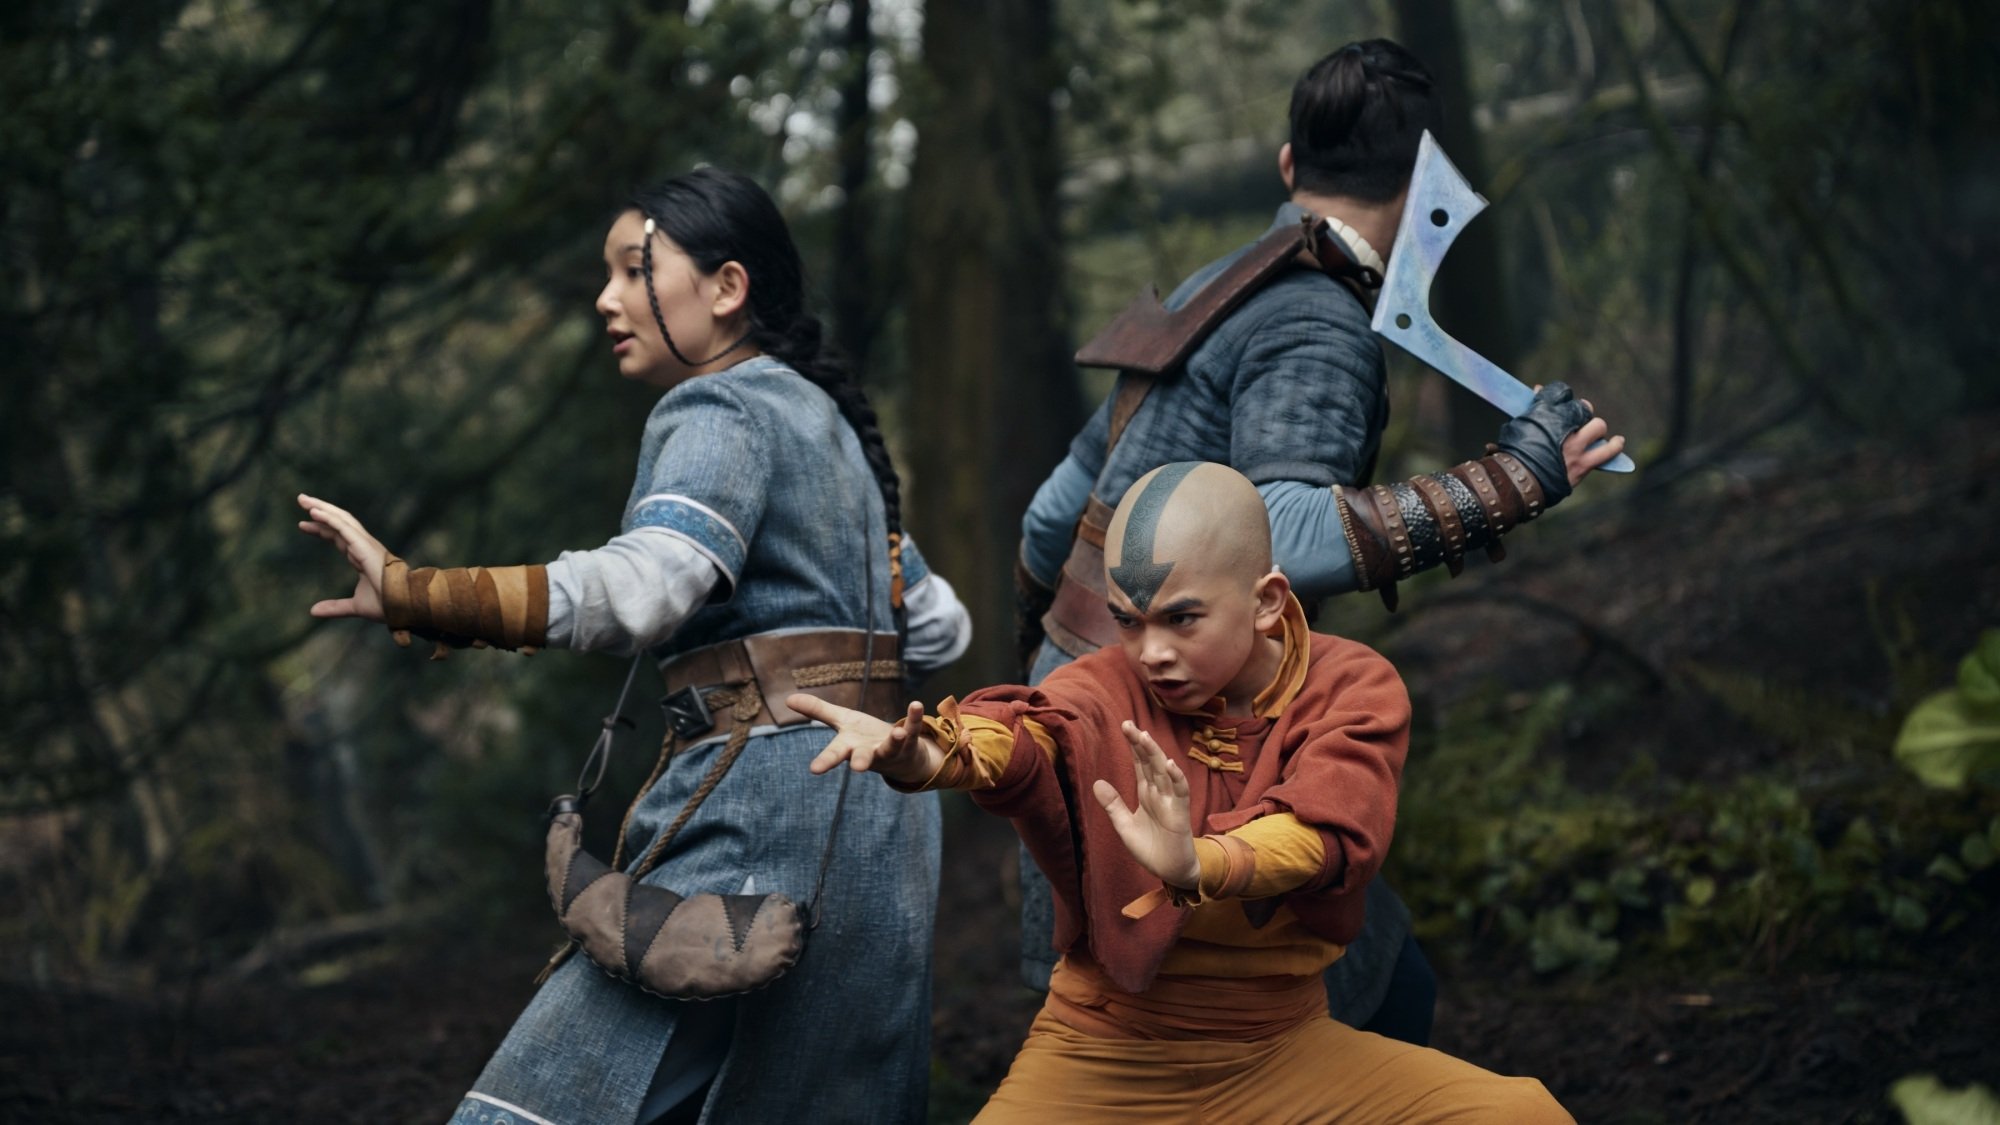 Katara, Aang, and Sokka stand back to back in fighting stances.